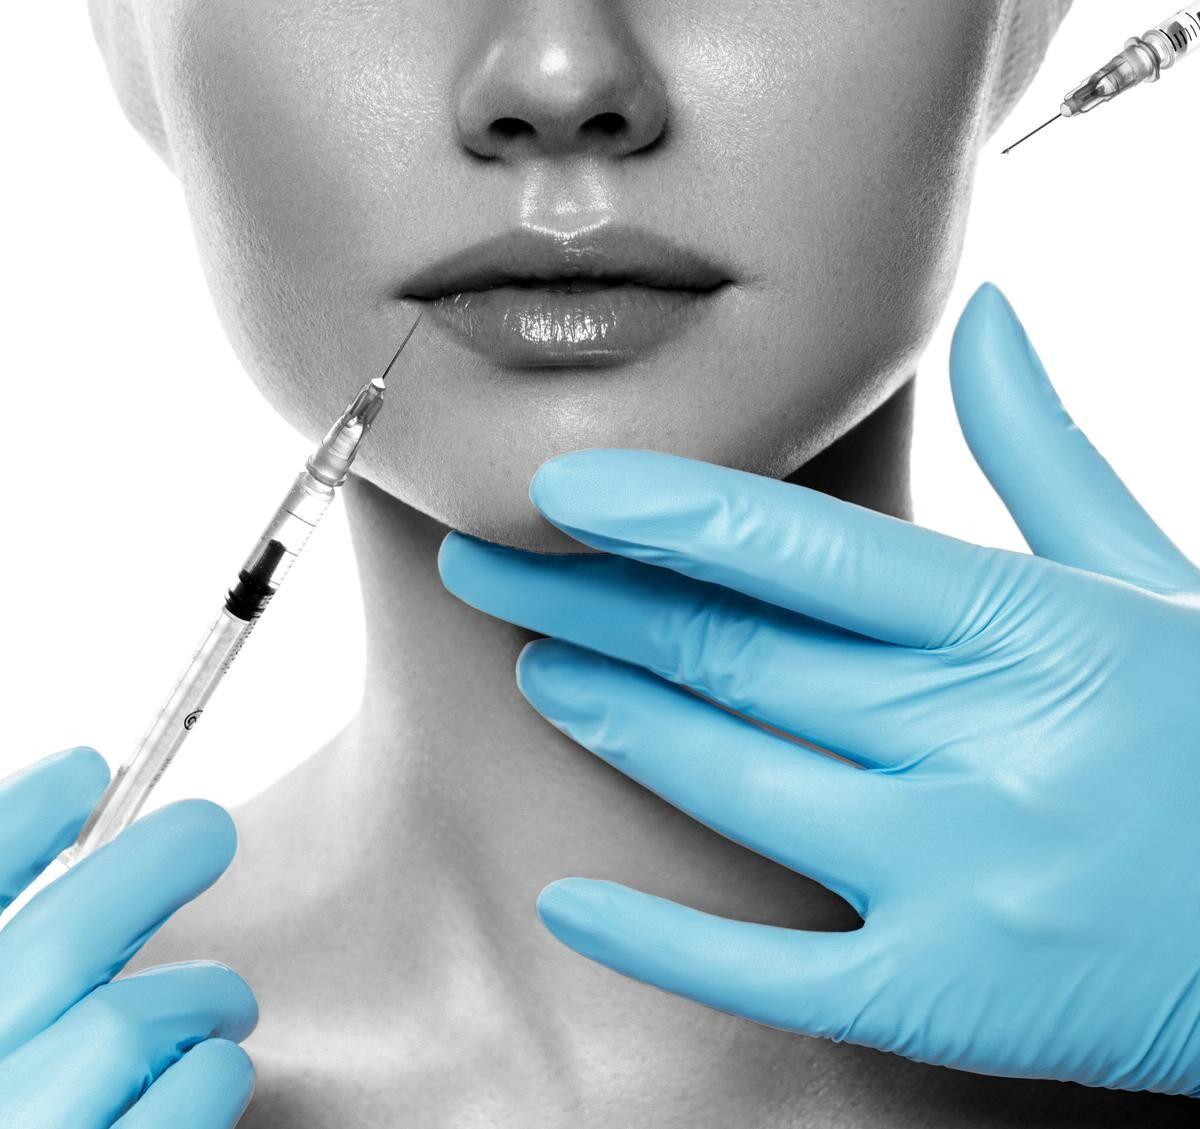 Gen Z's obsession with plastic surgery hits new high